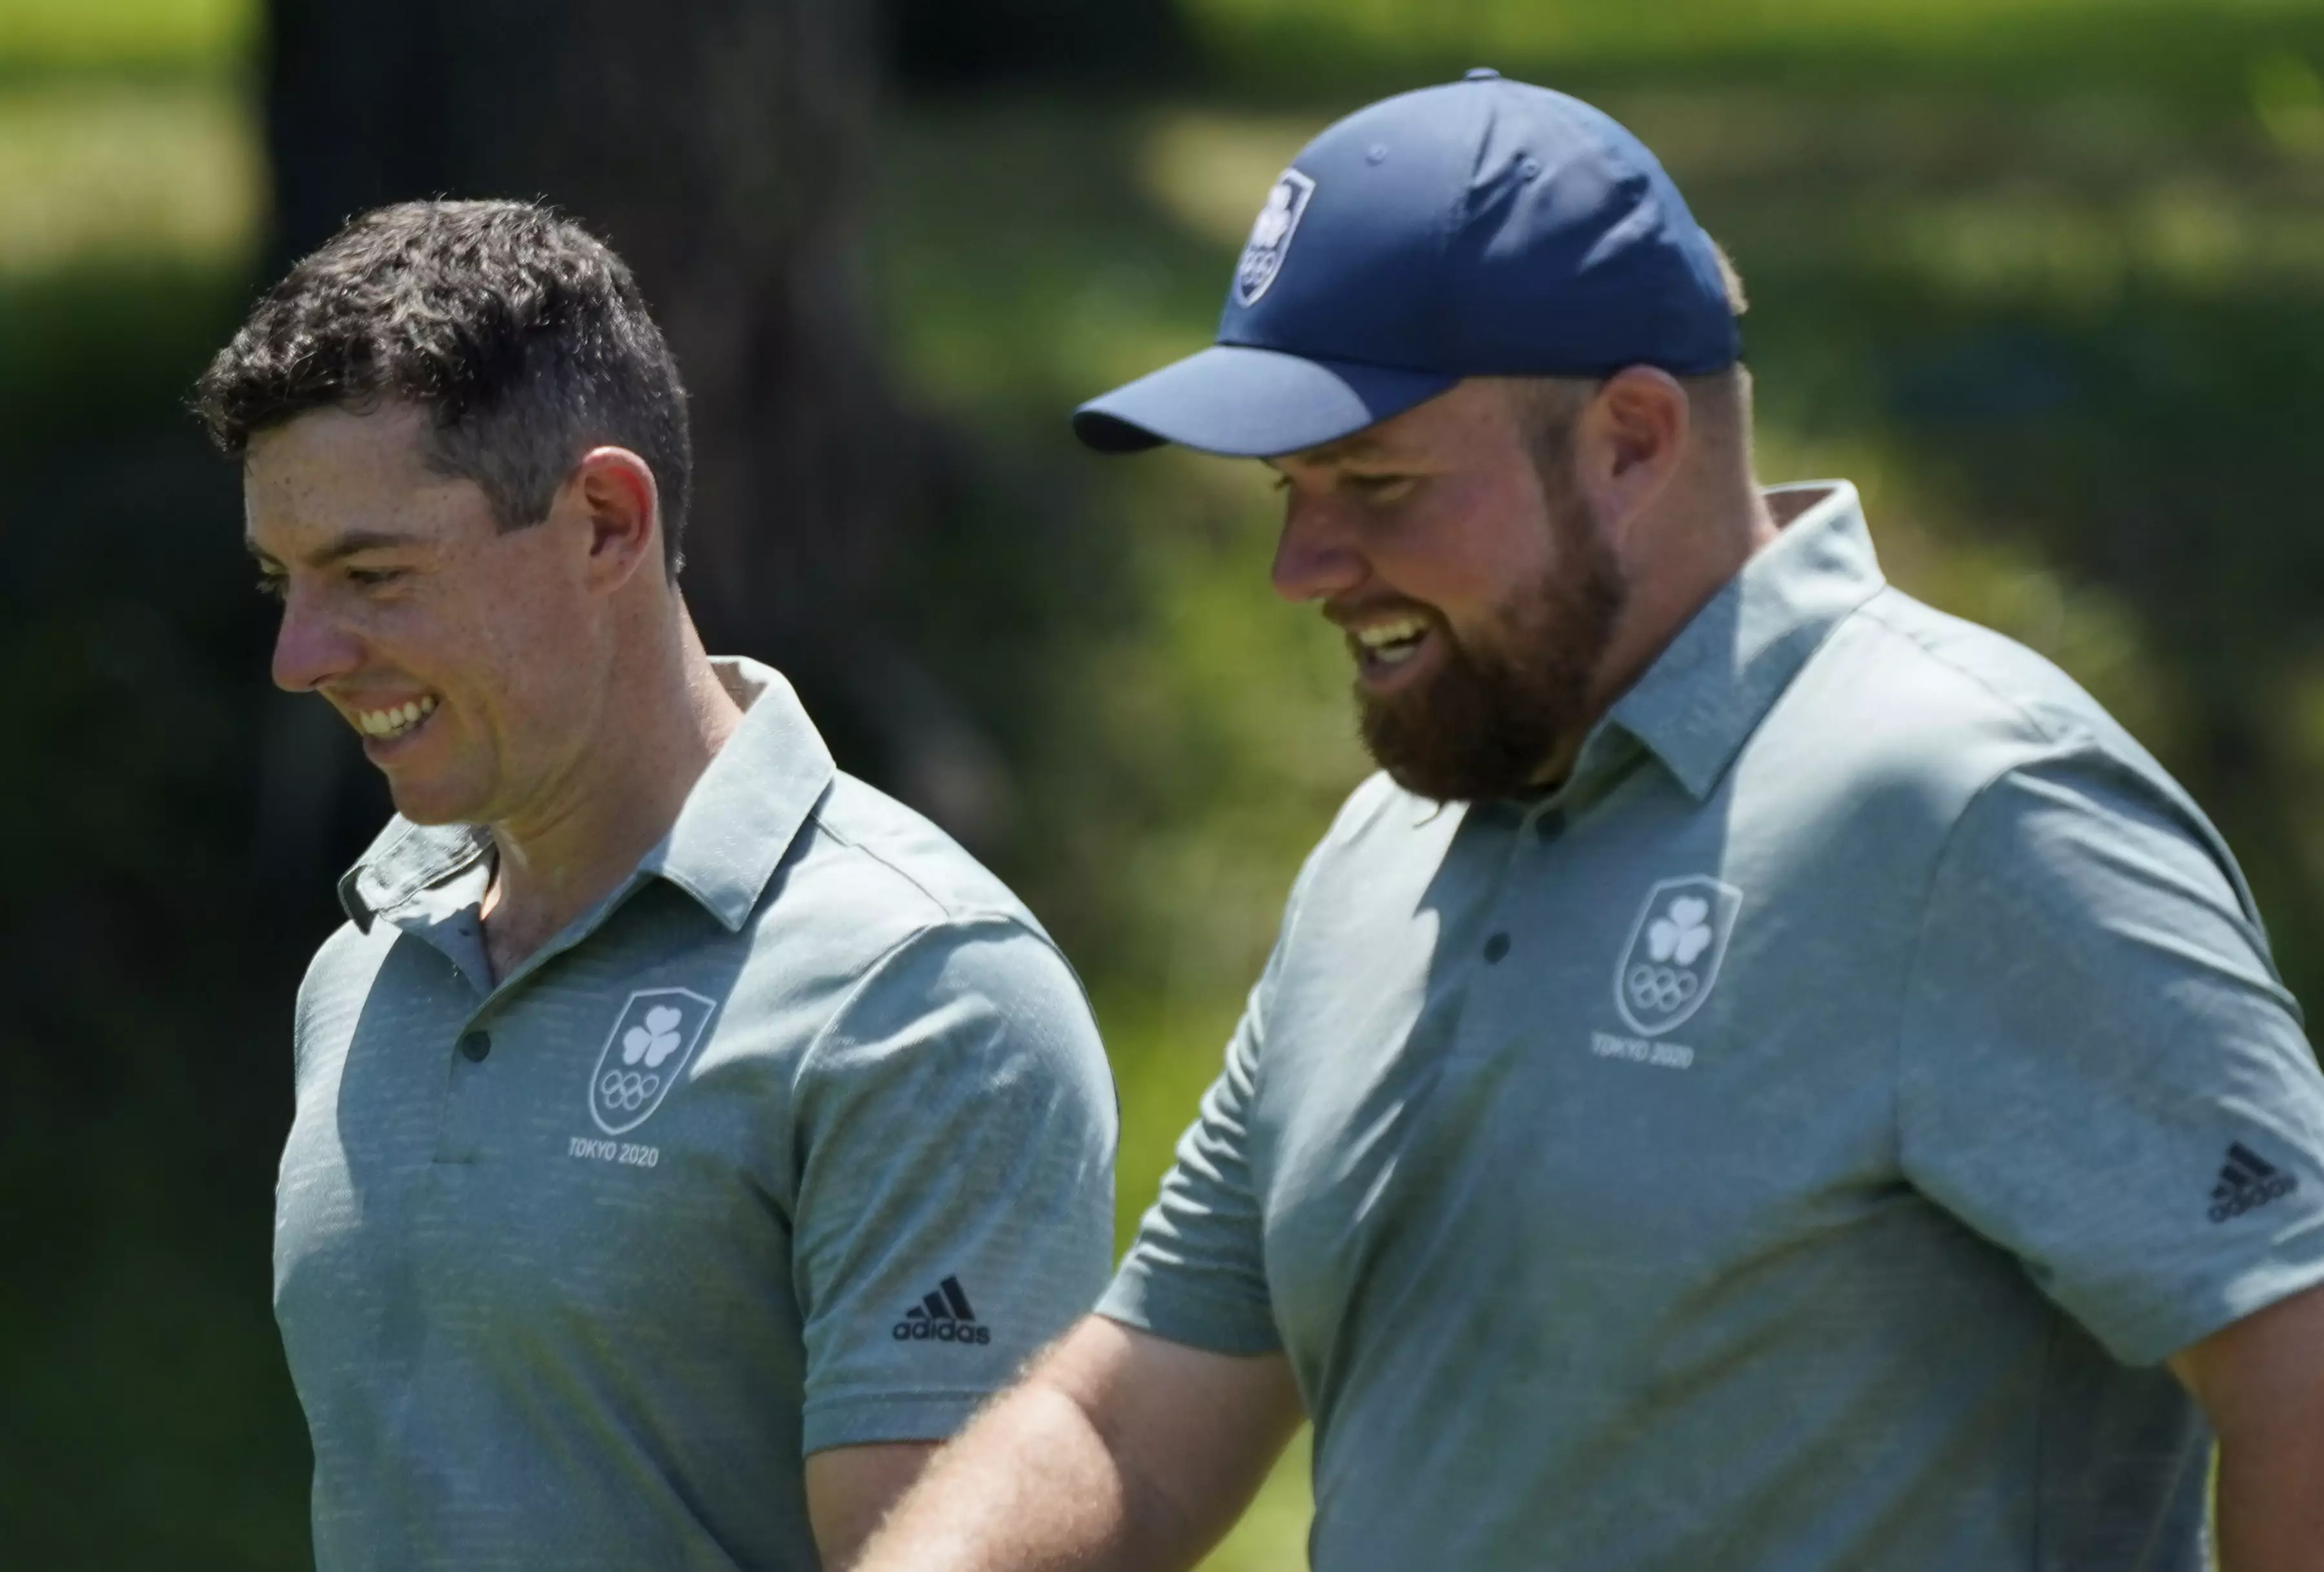 Rory McIlroy and his teammate Shane Lowry speak during a practice round of the men's golf event at the 2020 Summer Olympics. (